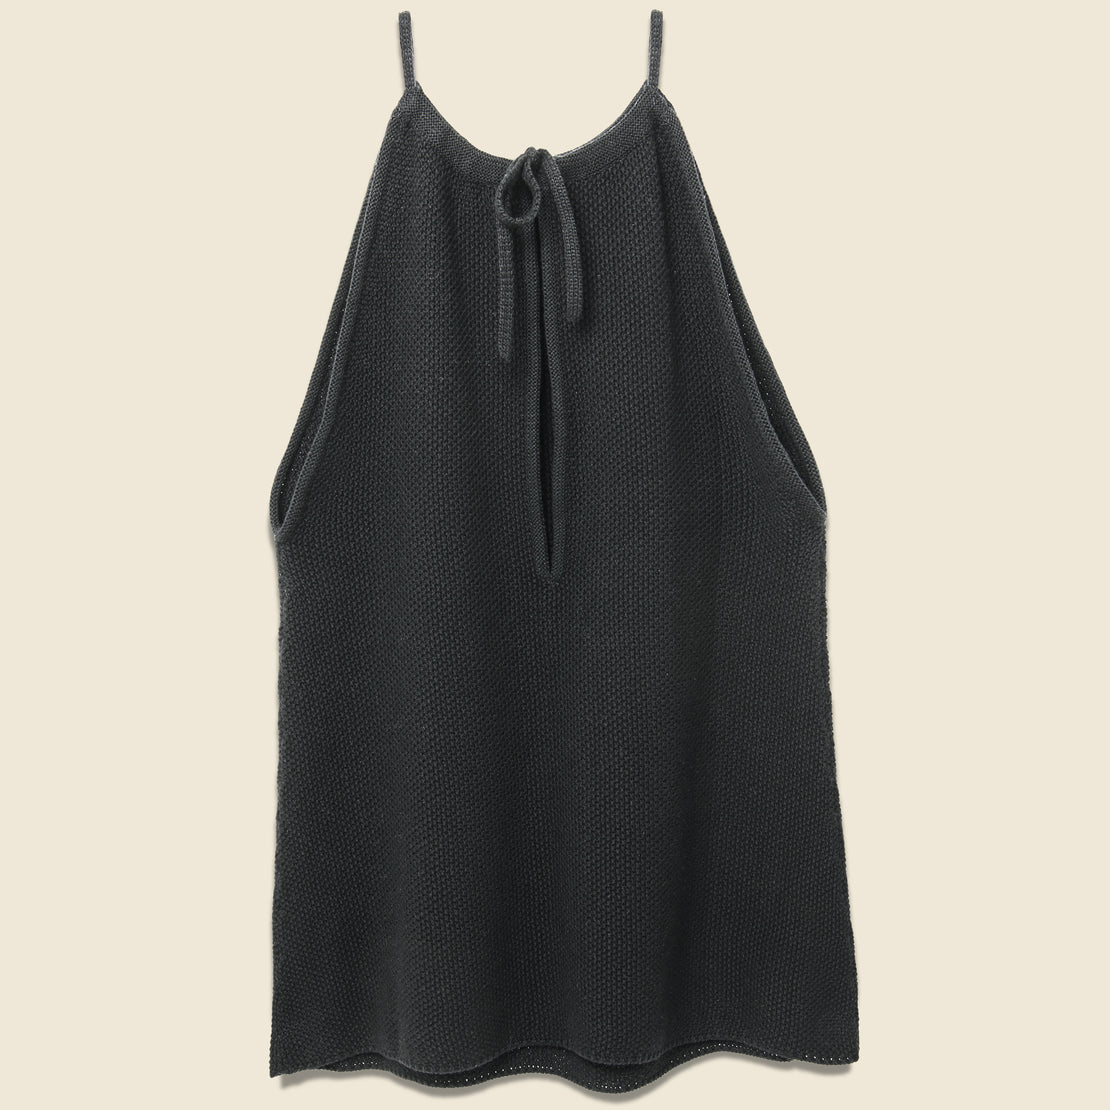 Halter Tank - Black - First Rite - STAG Provisions - W - Tops - Sleeveless